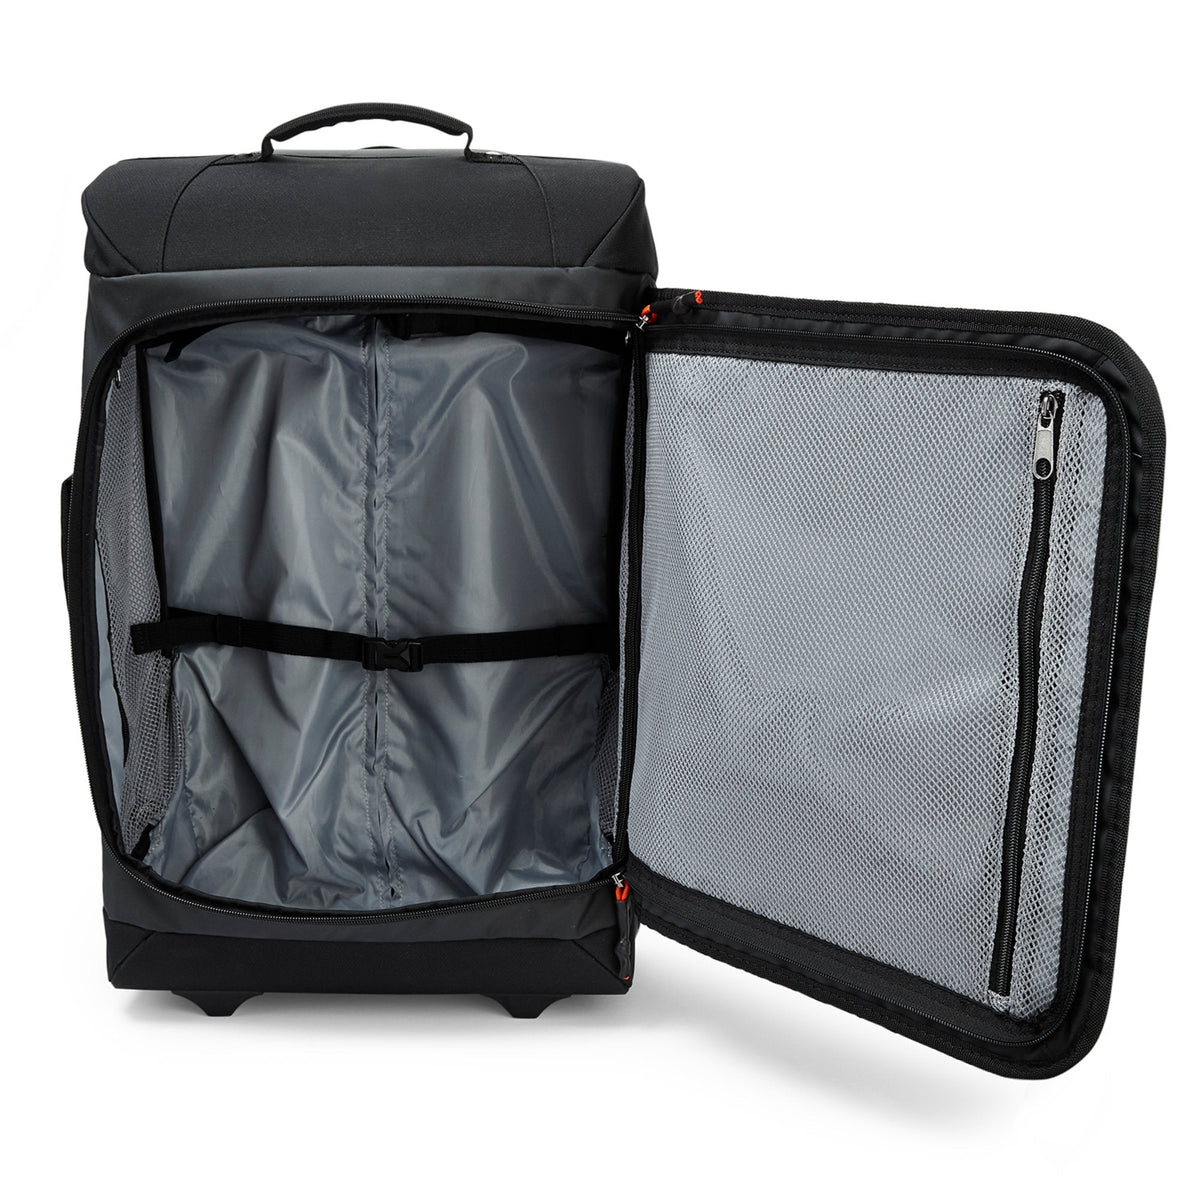 GILL Rolling Carry On Bag - Black